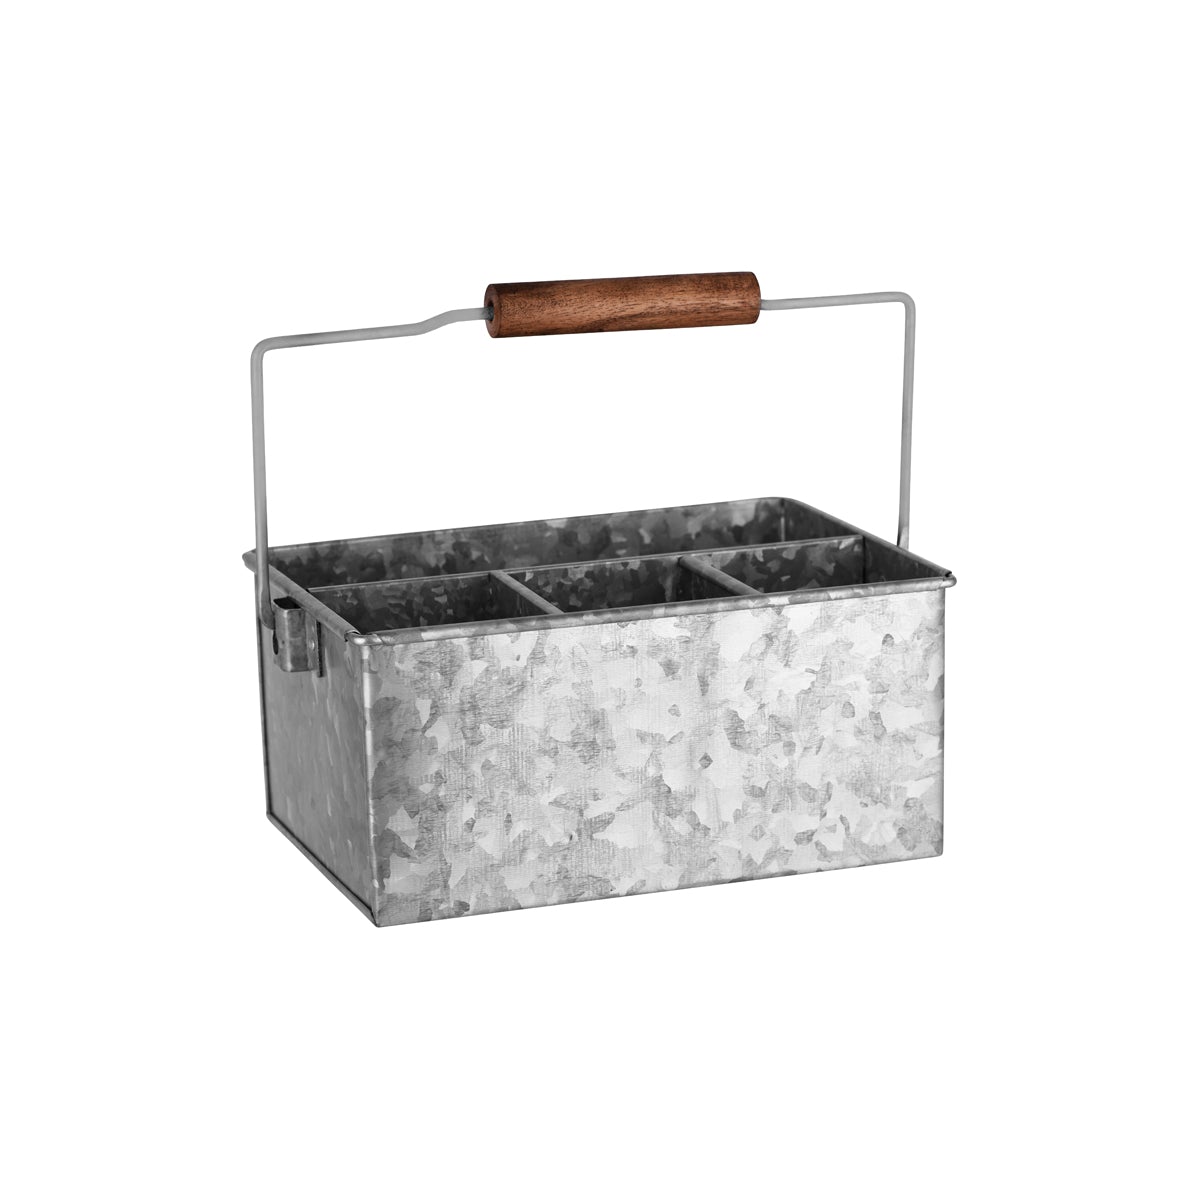 78696 Chef Inox Coney Island 4-Compartment Caddy with Handle Galvanised 250x180x115mm Tomkin Australia Hospitality Supplies